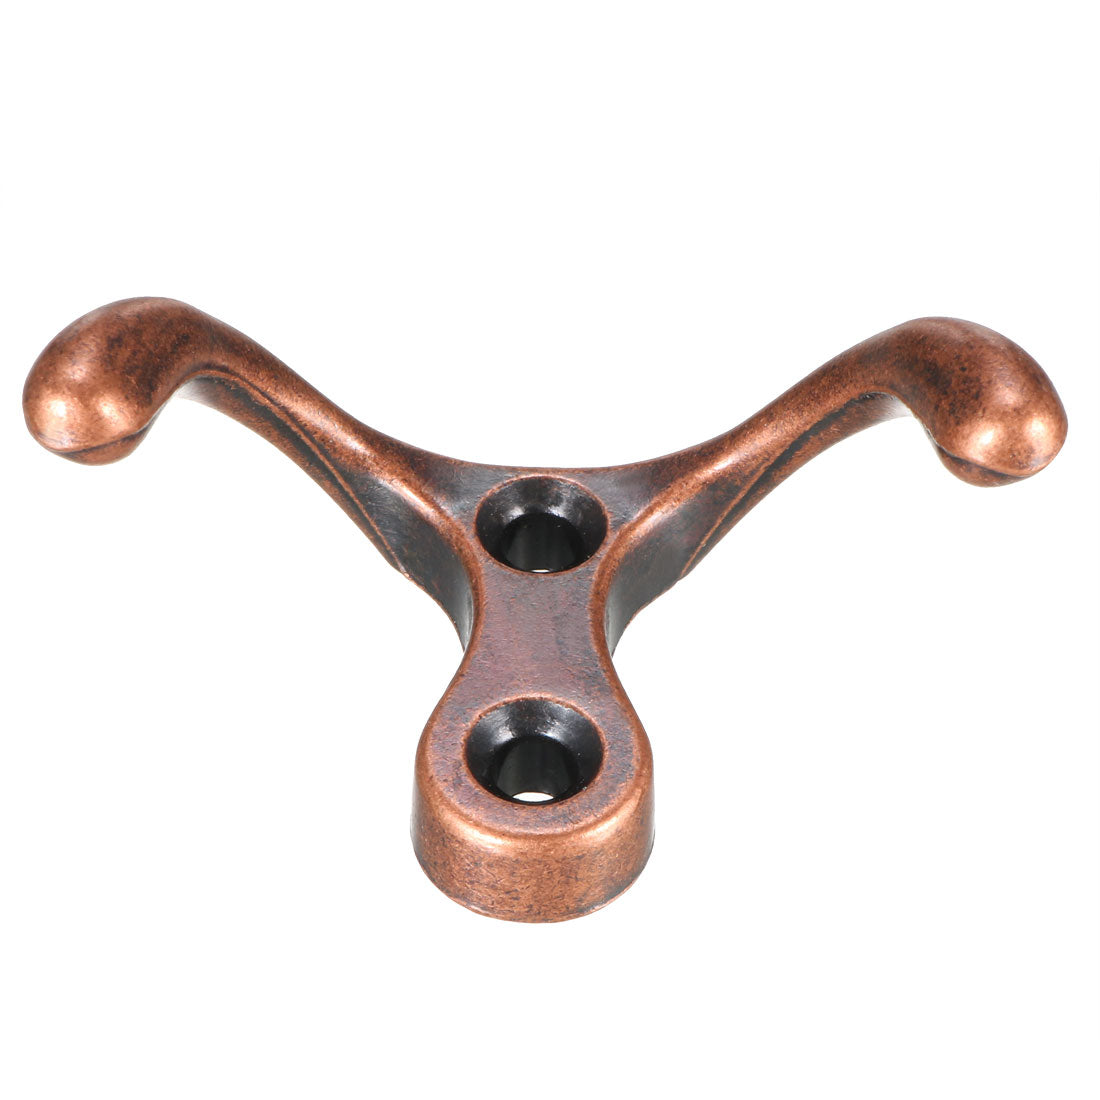 uxcell Uxcell Dual Prong Coat Hooks Wall Mounted Retro Double Hooks Utility Bronze Hook for Coat Scarf Bag Towel Key Cap Cup Hat 30mm x 55mm x 29mm 5pcs